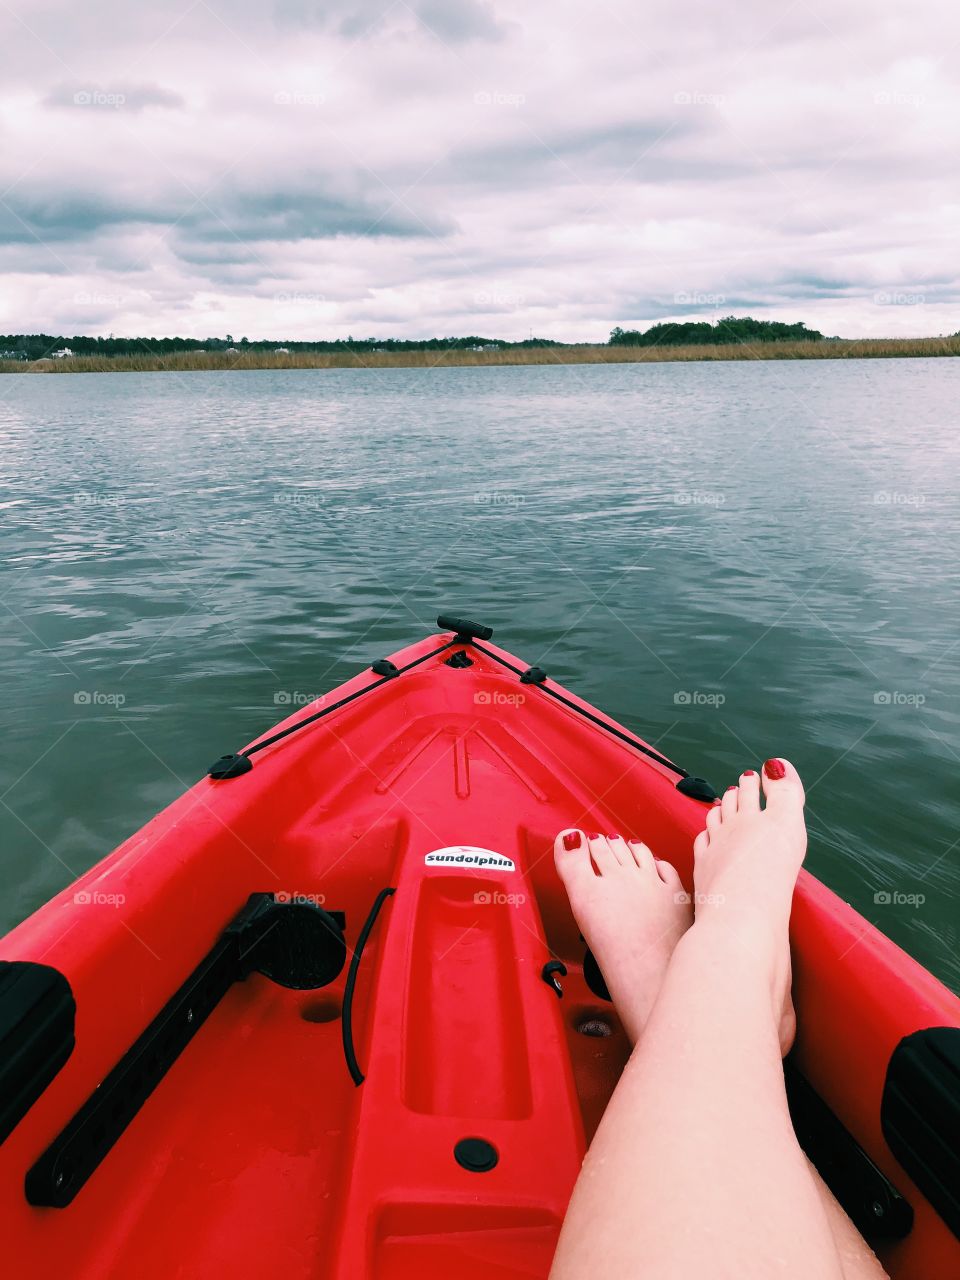 Saturday’s call for Kayaking !